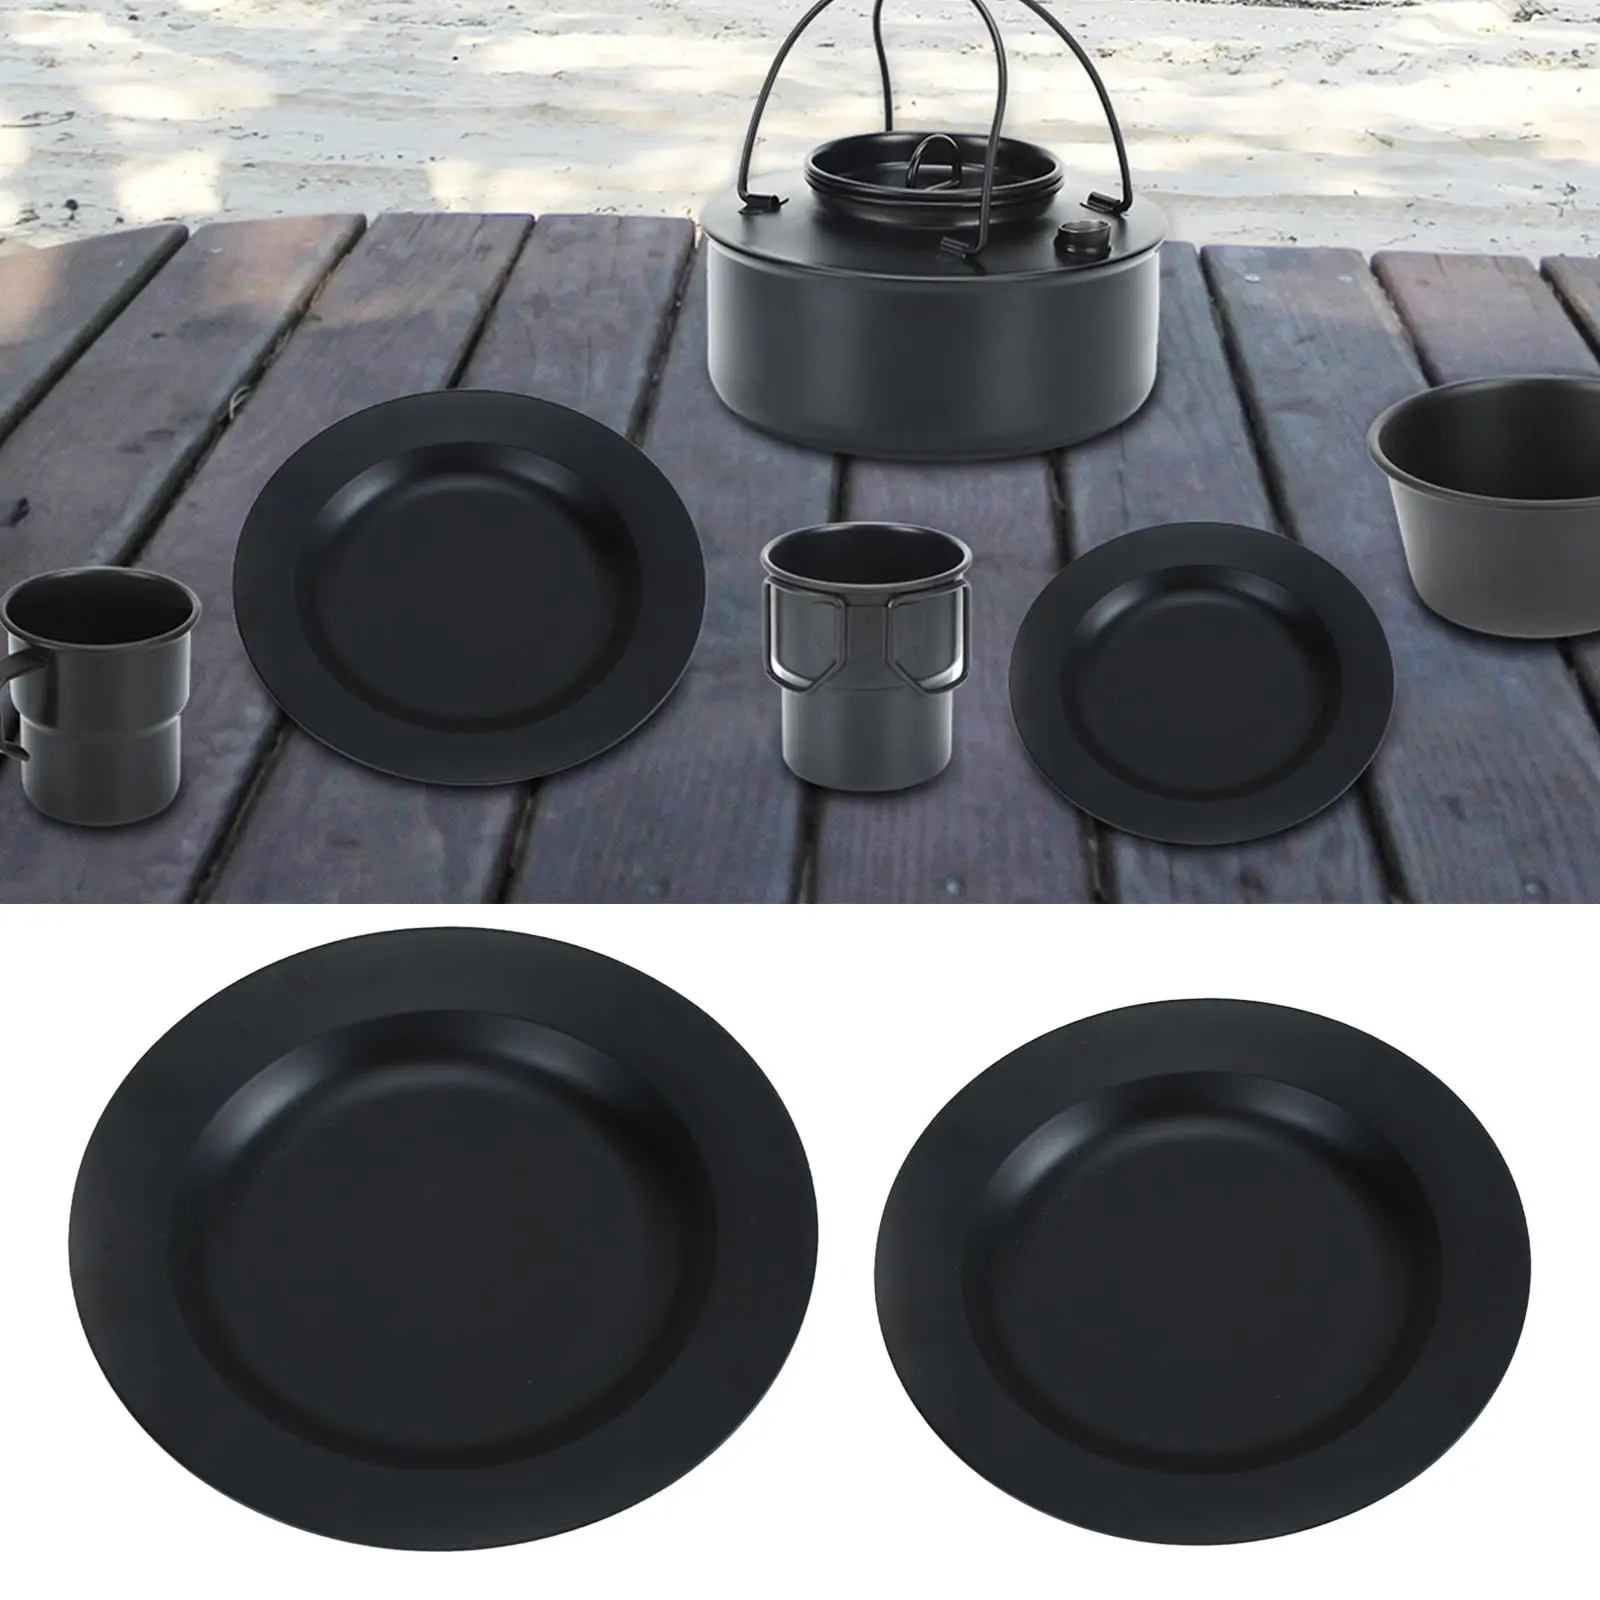 Stainless Steel Camping Dish Cookware Round Tableware Plate for Hiking Picnic Fishing